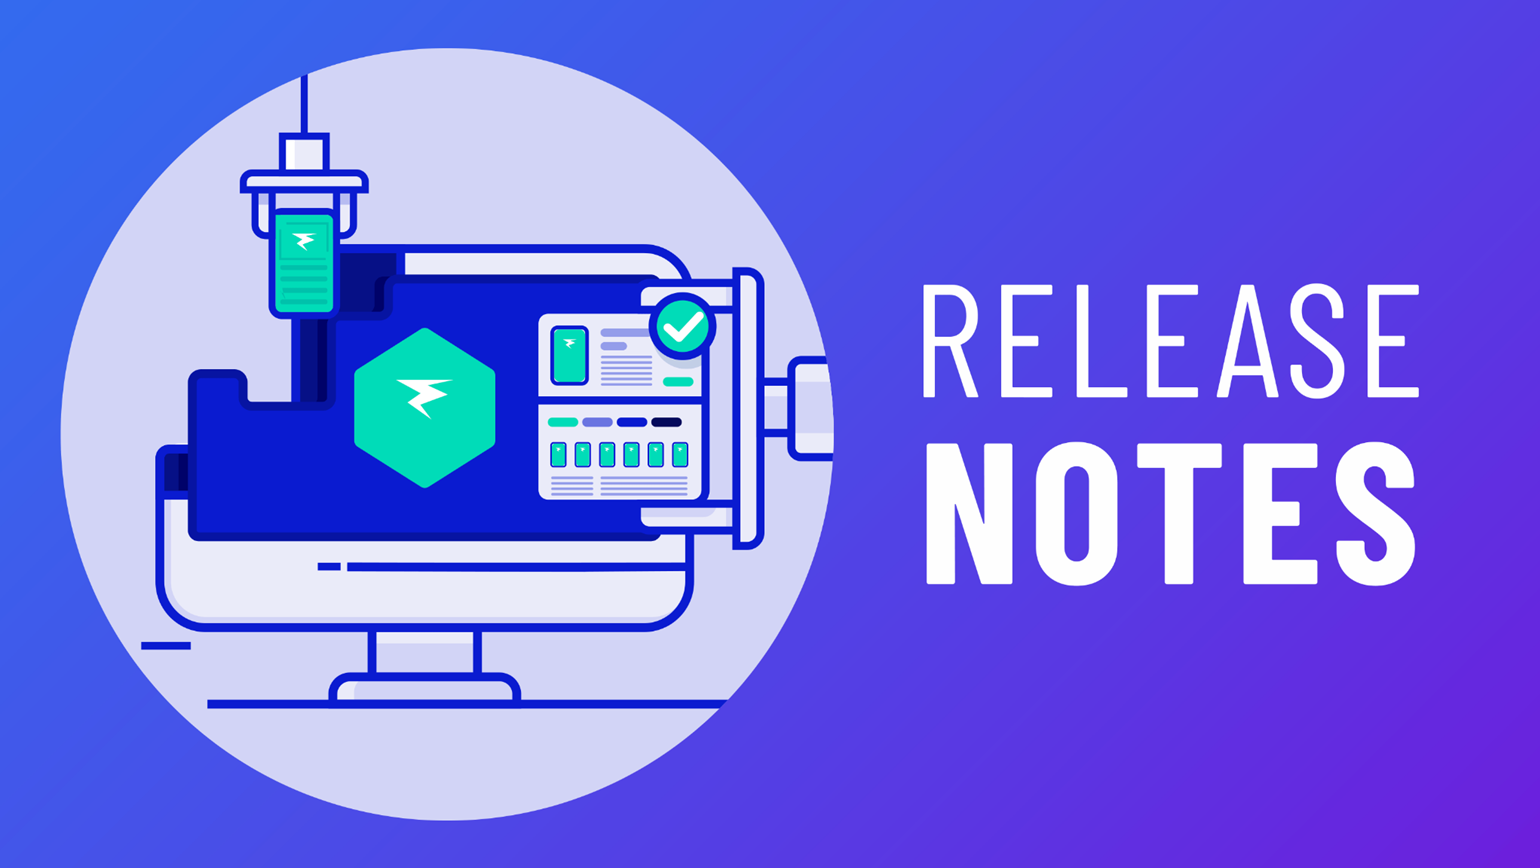 Release Notes